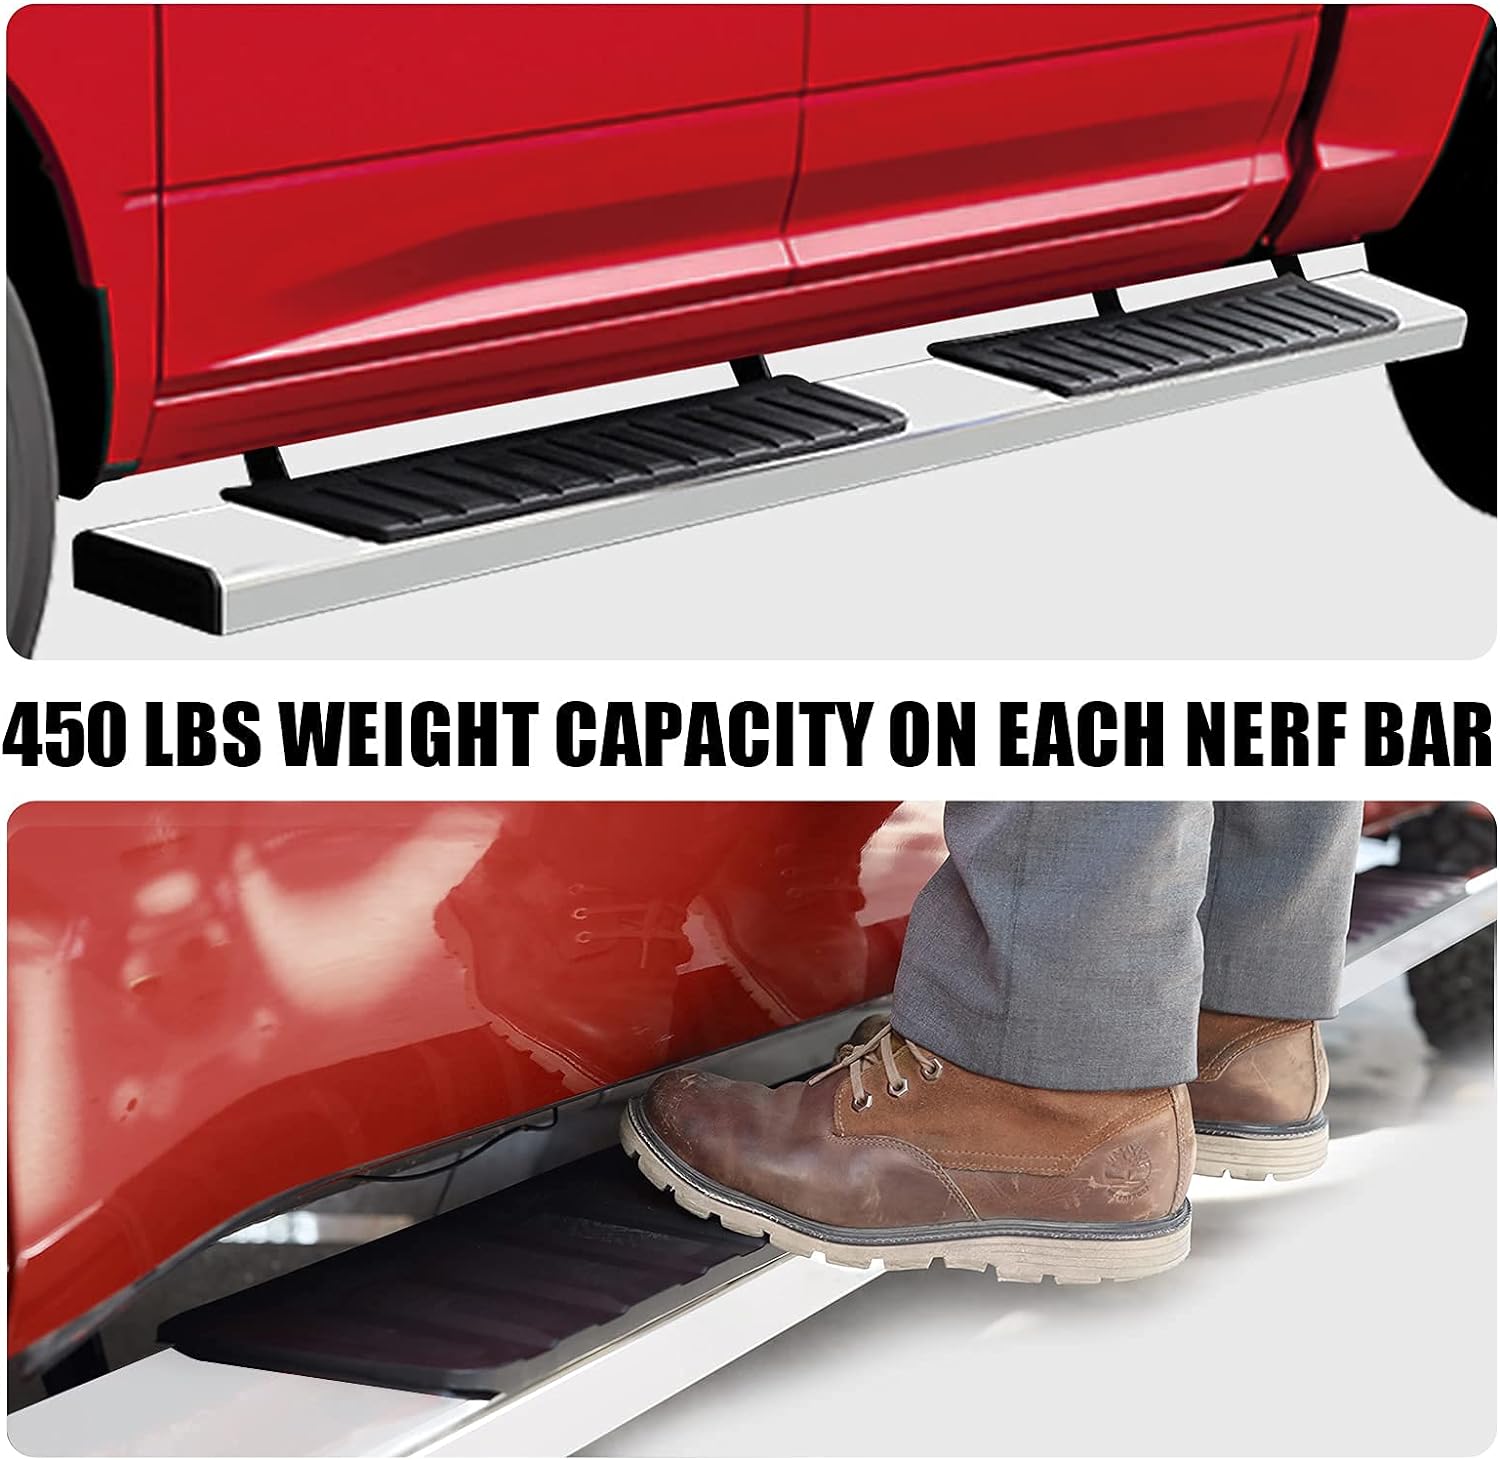 Running Boards Compatible with 2006-2014 Honda Ridgeline, Stainless Steel Side Steps H6 Style.